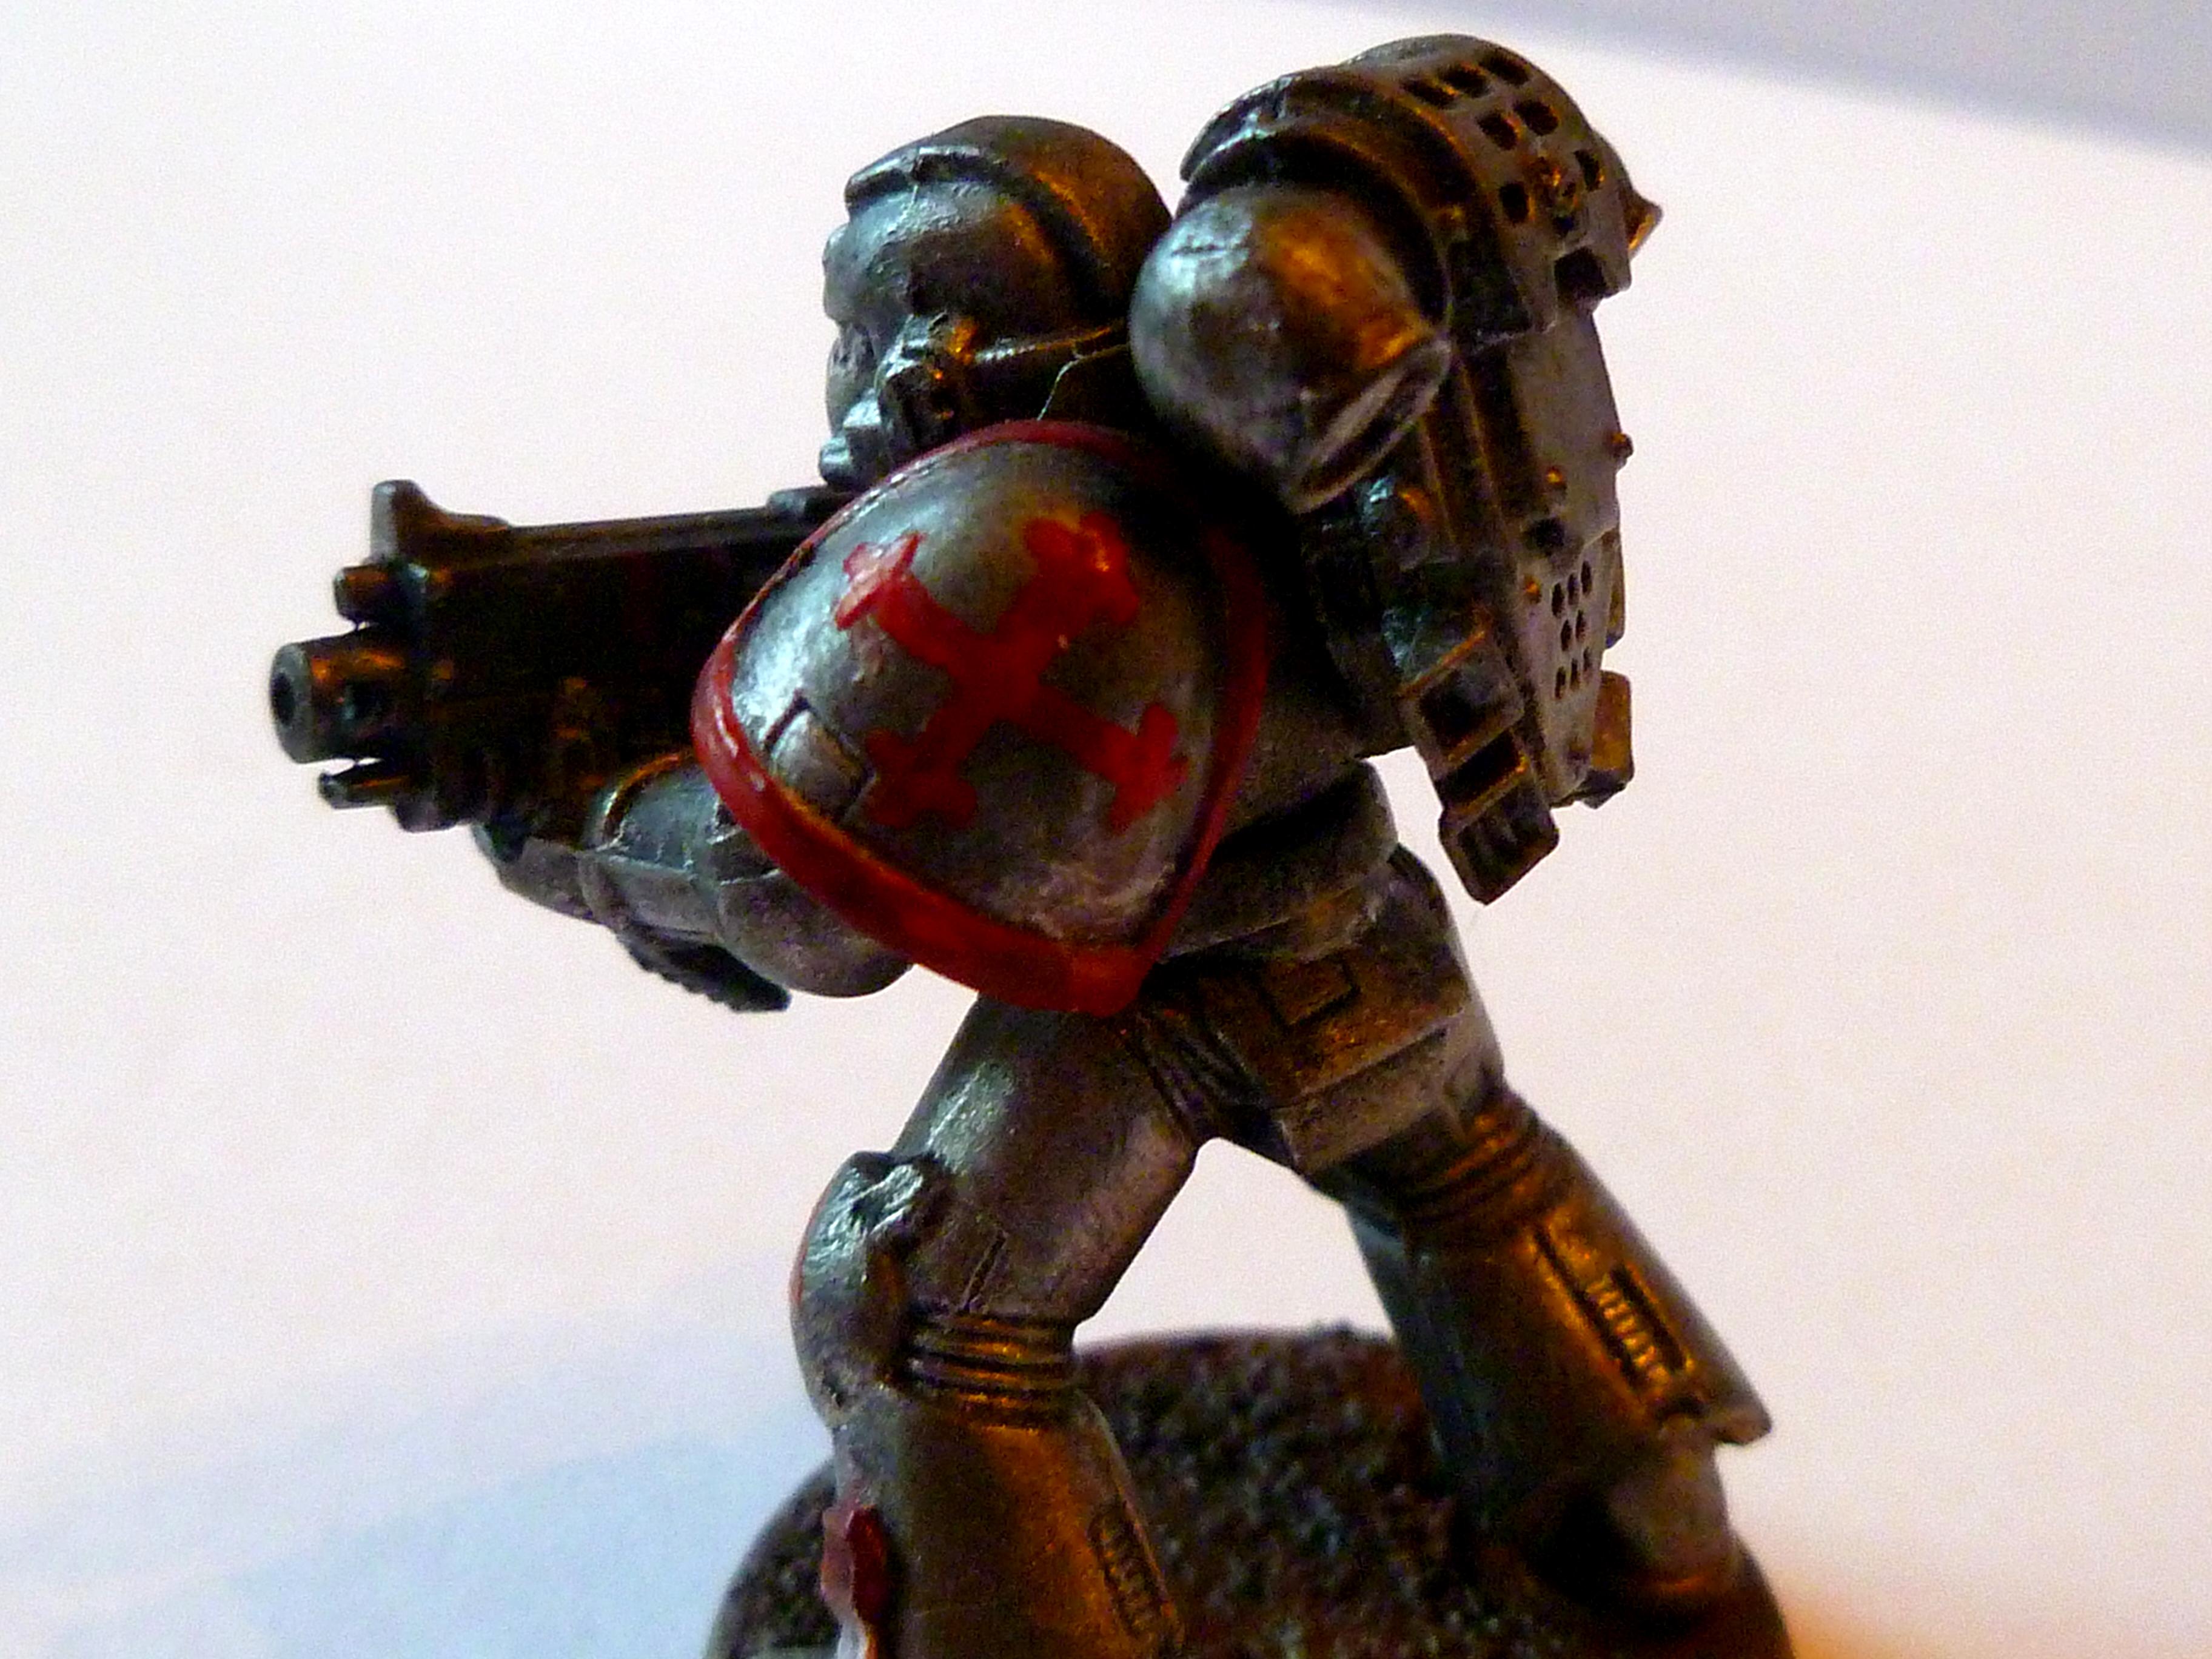 Badab, Badab War, Chapters, Fire Angels, Fire Angles, Space Marine Chapters, Space Marines